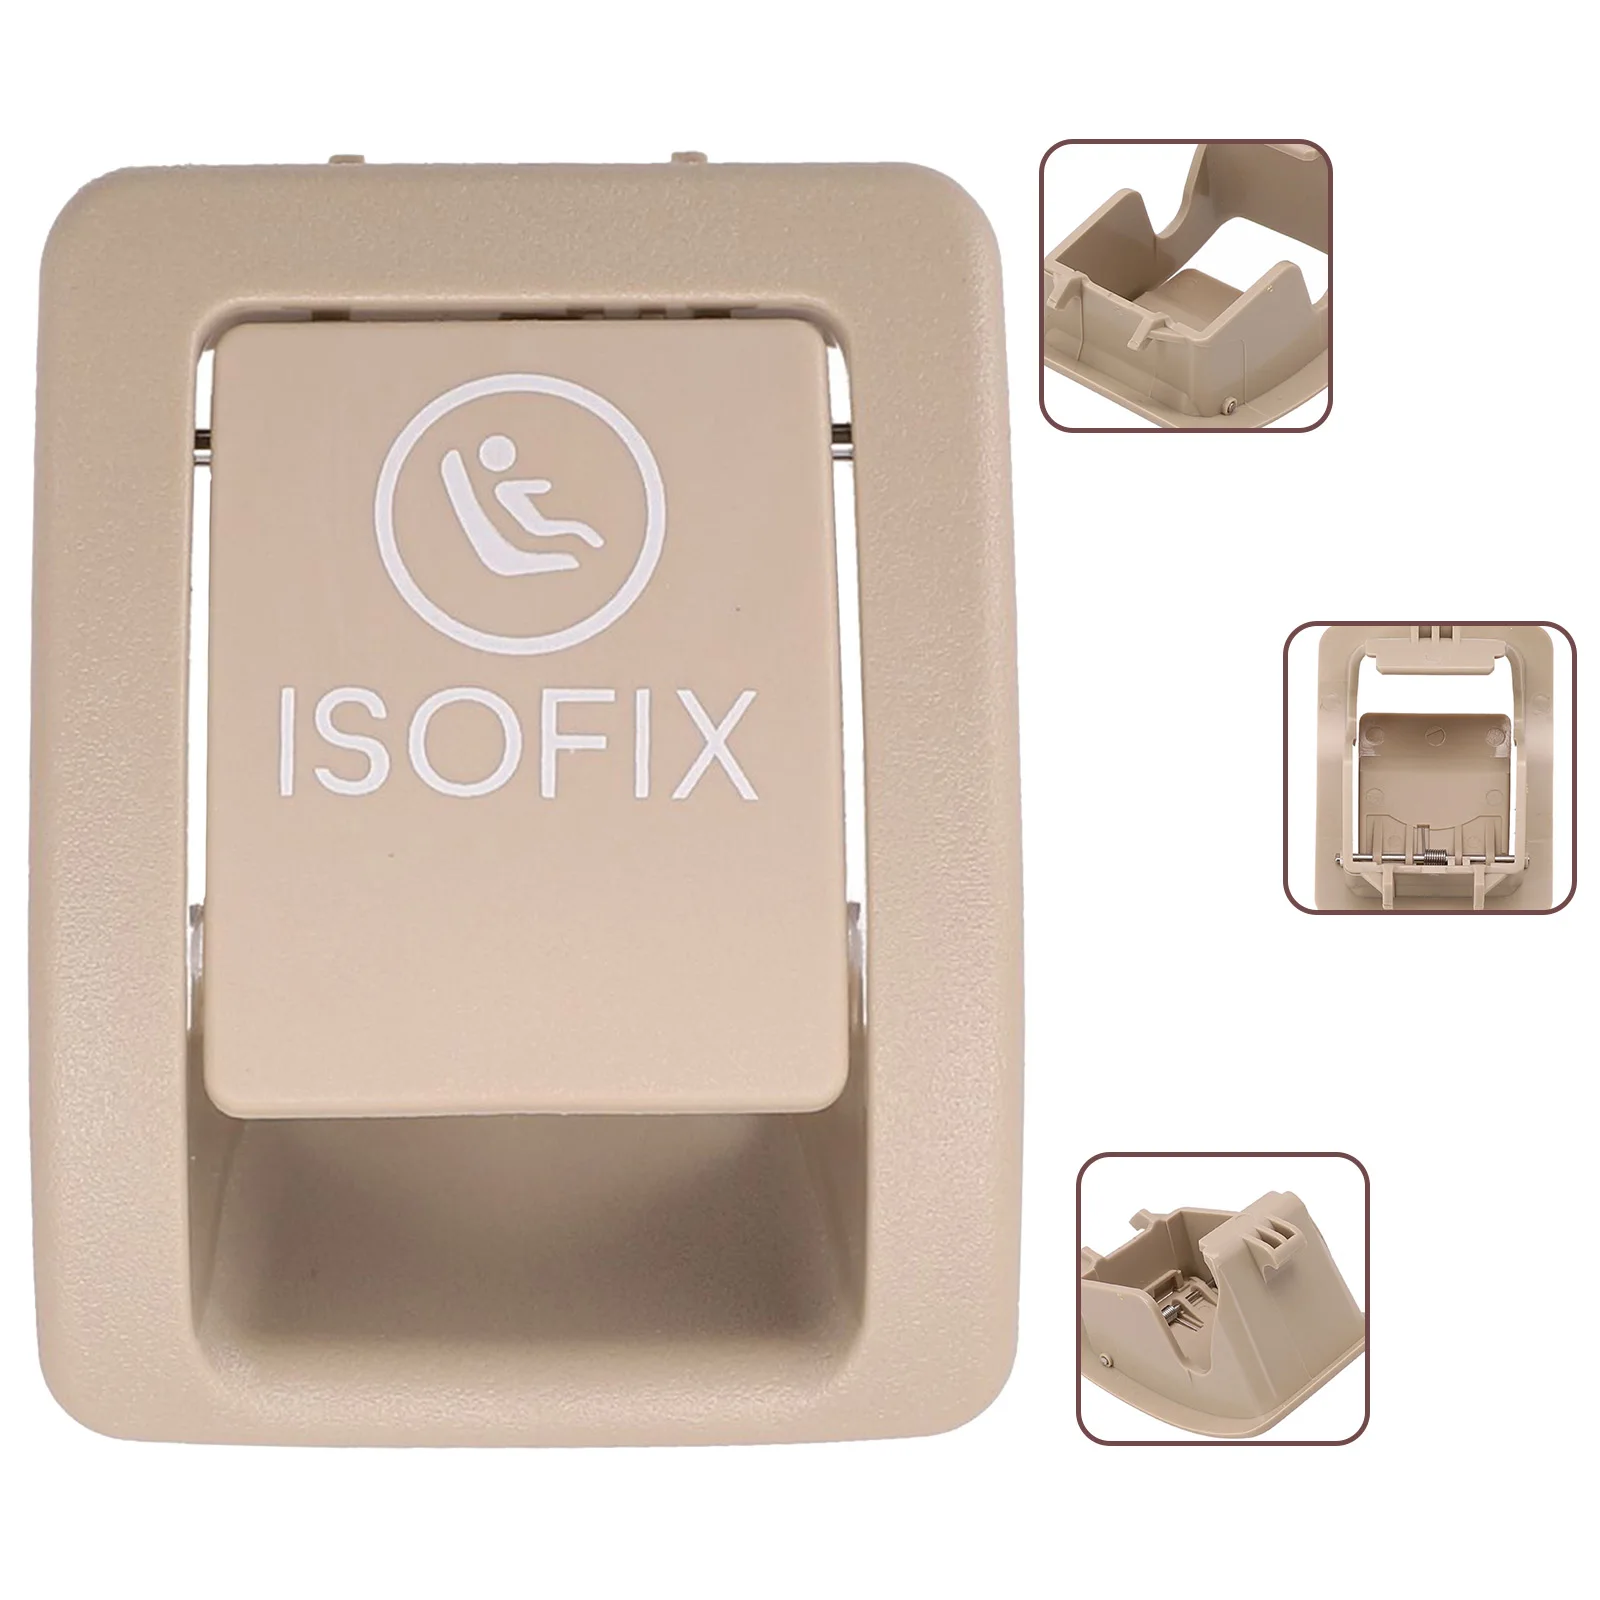 Beige Plastic and Metal ISOFIX Cover for Mercedes C Class W205 C300 C350 C200 C180 Easy to Install Factory Specifications beige plastic and metal isofix cover for mercedes c class w205 c300 c350 c200 c180 easy to install factory specifications